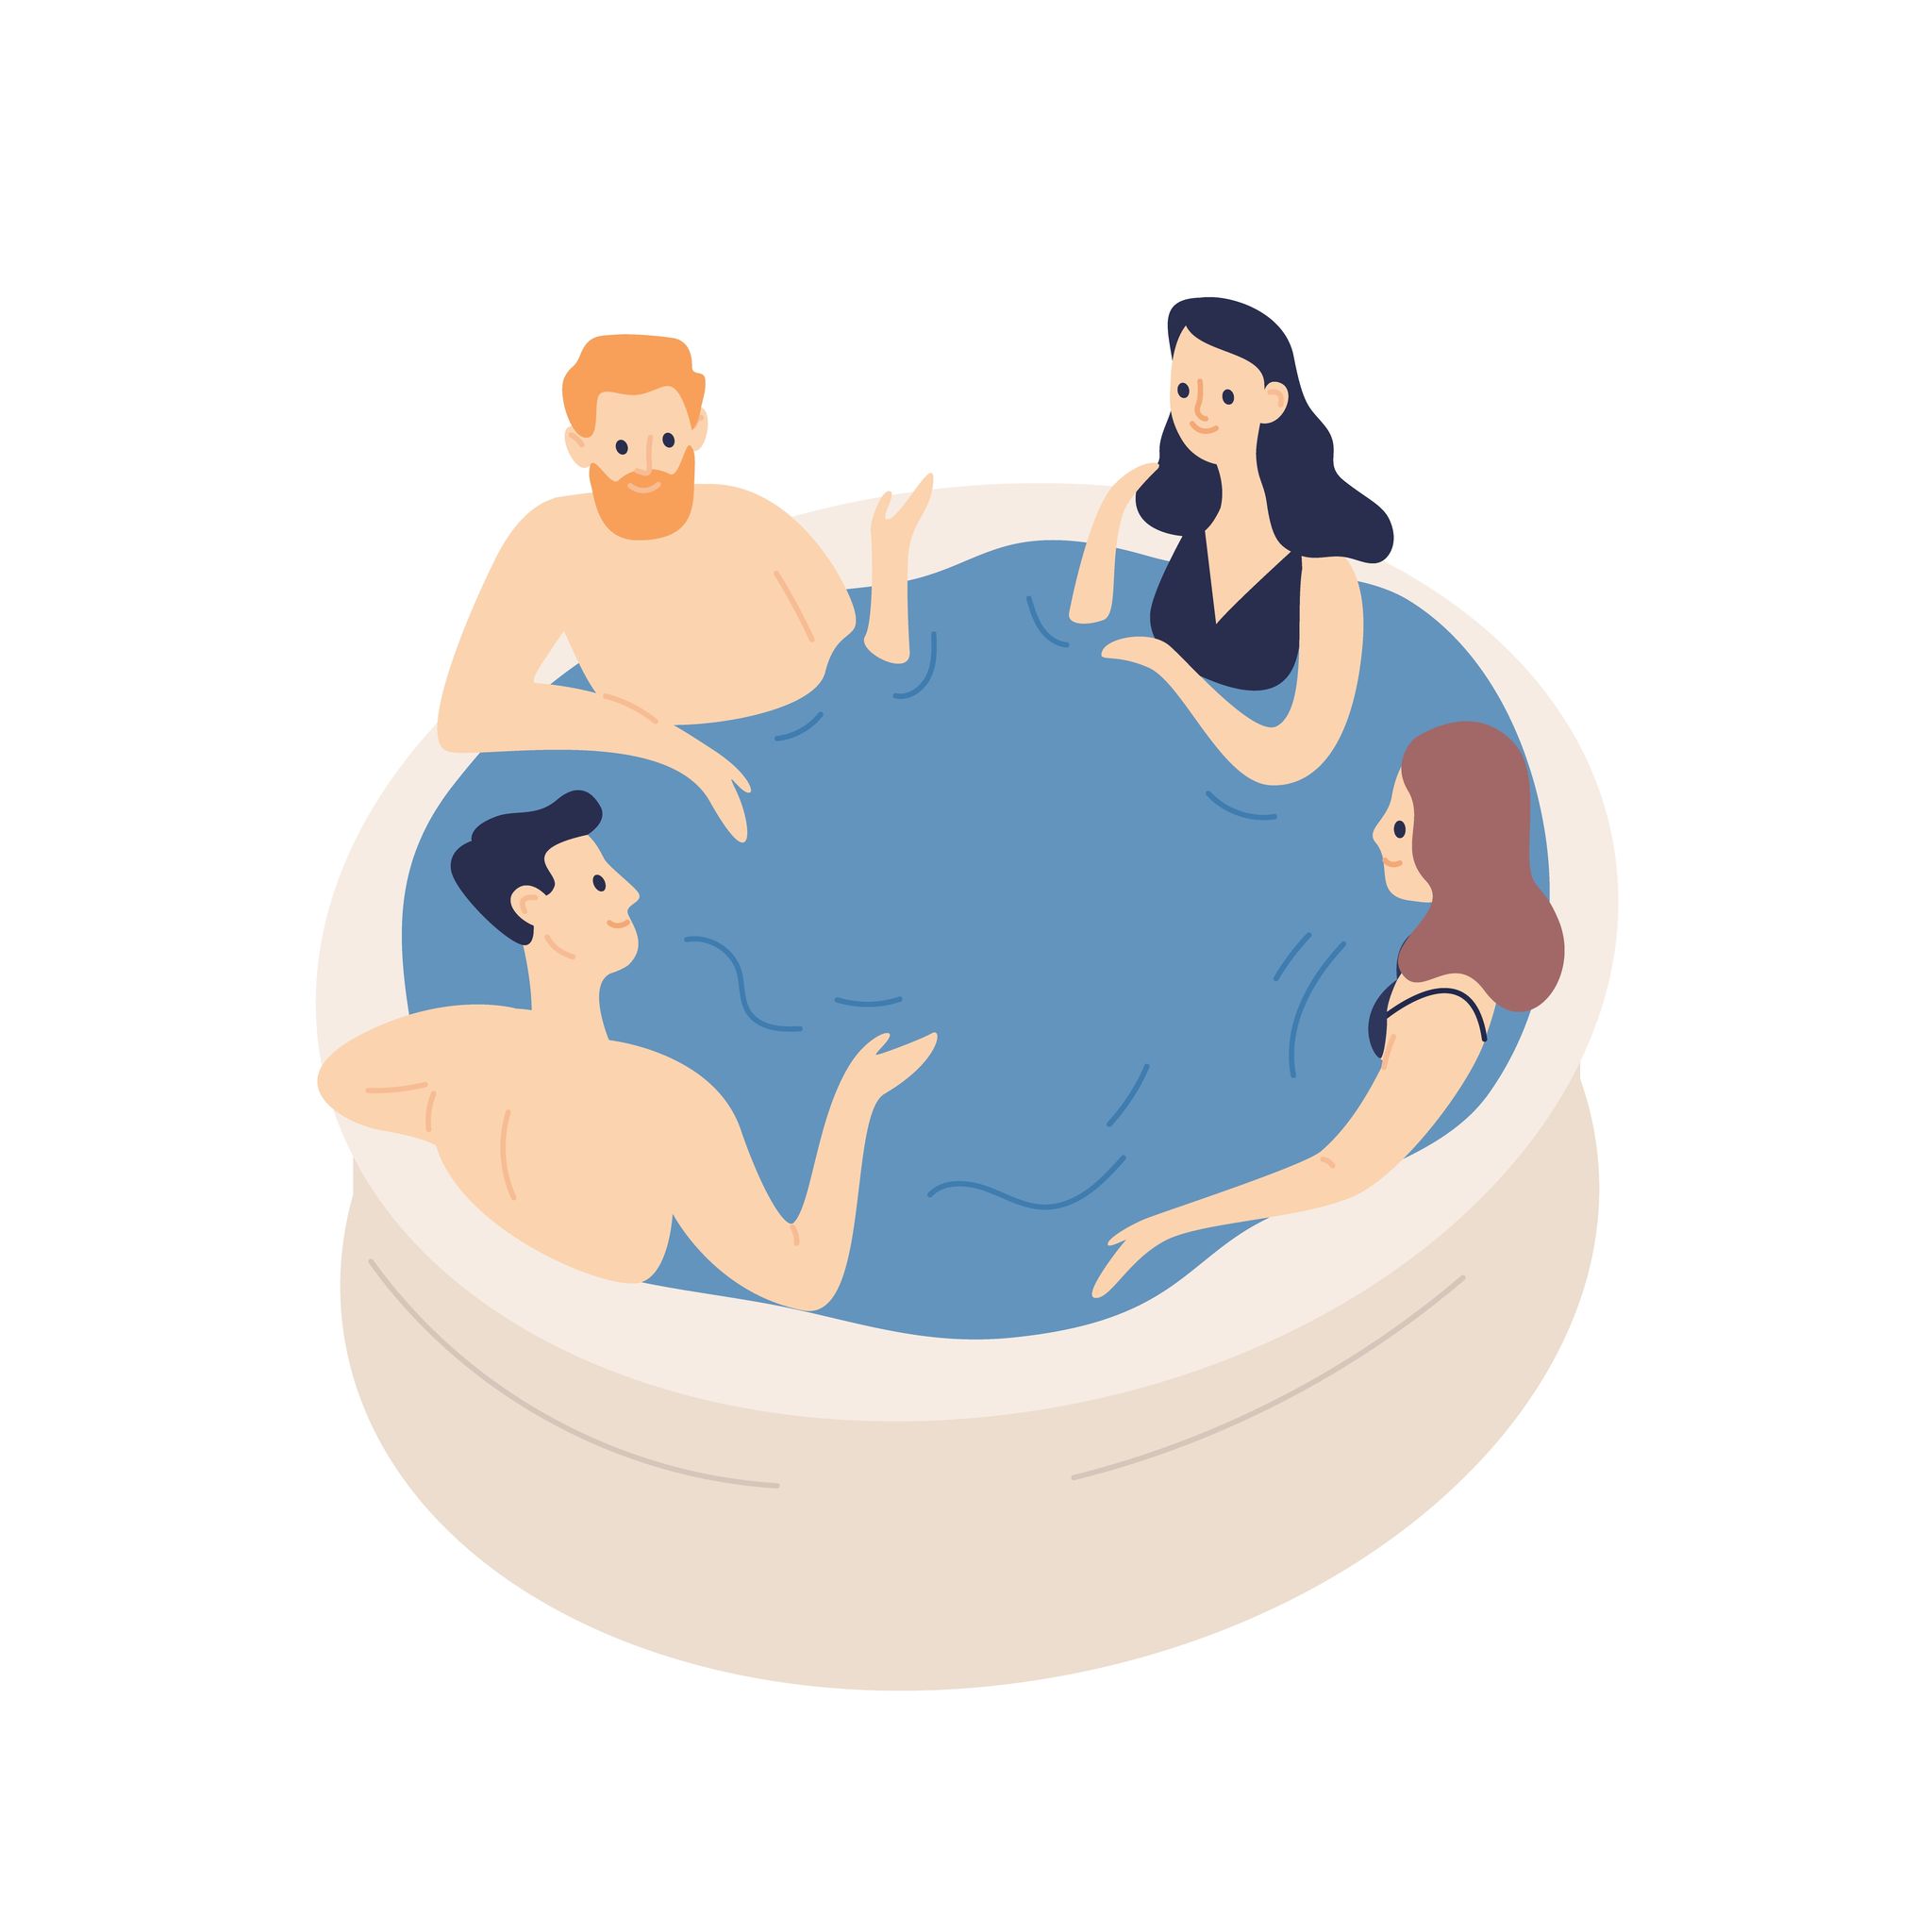 Group of smiling friends relaxing in jacuzzi vector flat illustration. Cartoon positive people in swimming pool isolated on white background. Concept of recreation leisure and communication.